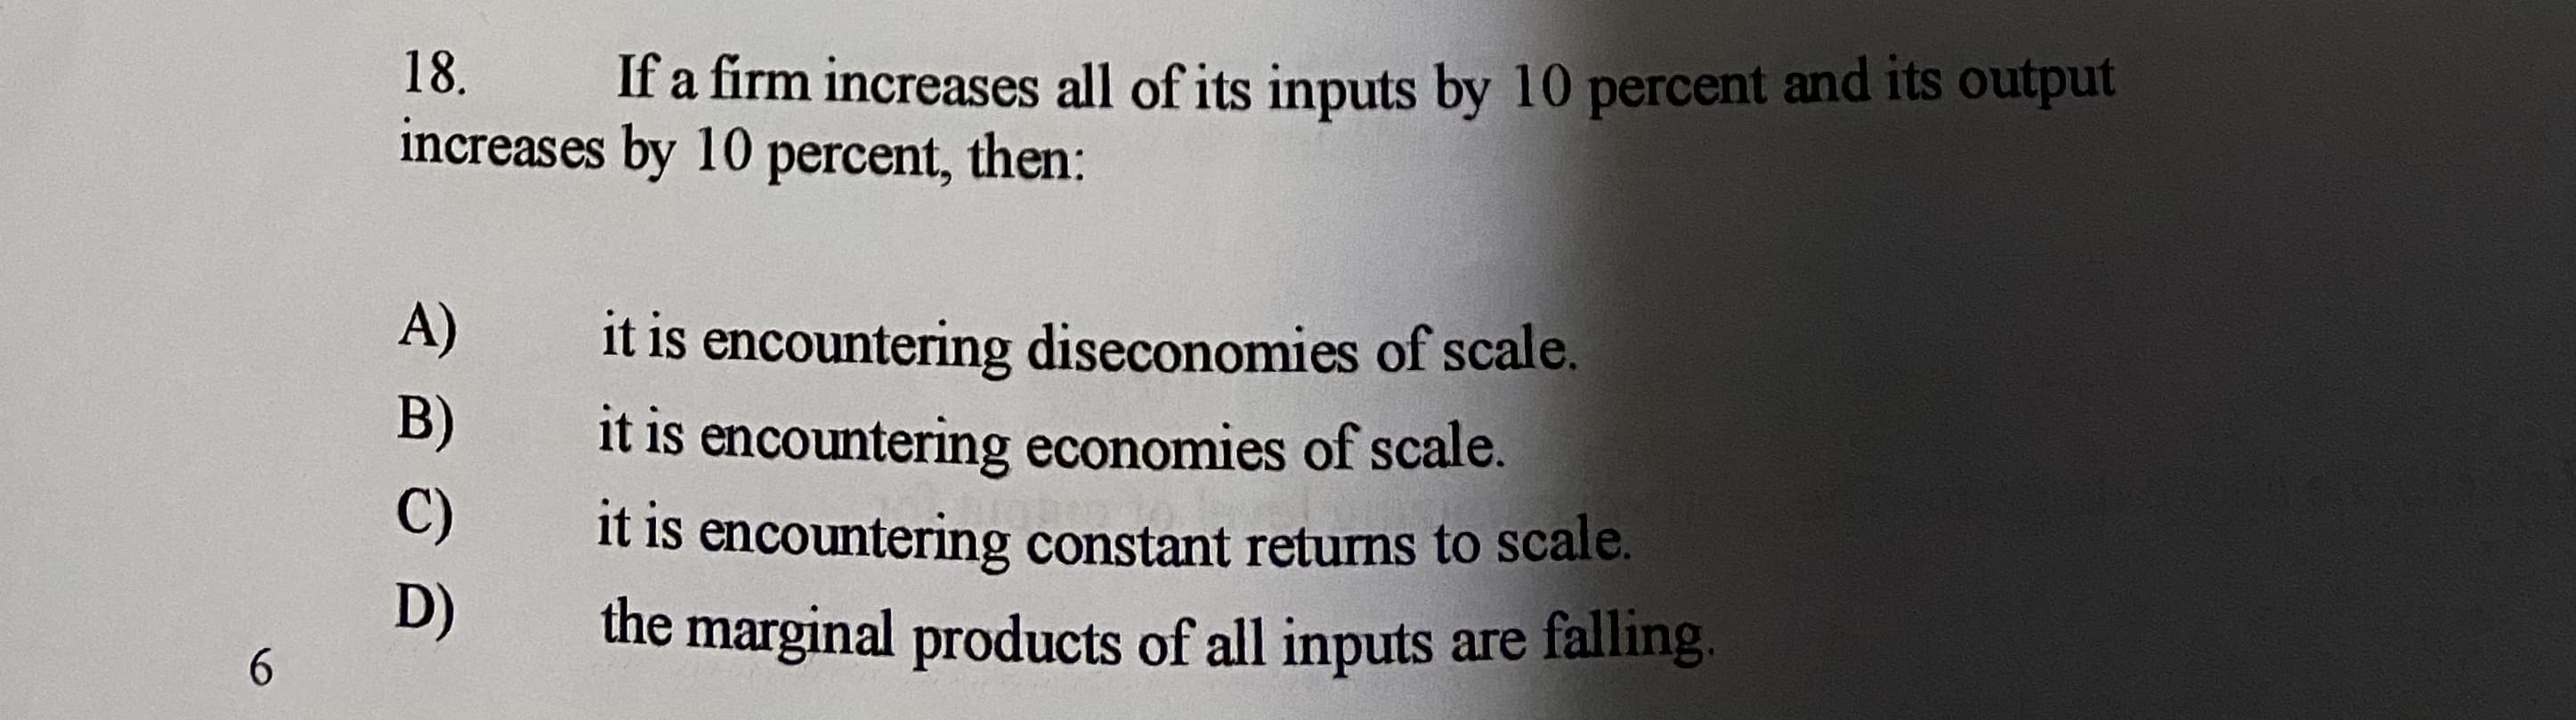 18.
If a firm increases all of its inputs by 10 percent and its output
increases by 10 percent, then:
A)
it is encountering diseconomies of scale.
it is encountering economies of scale.
it is encountering constant returns to scale.
the marginal products of all inputs are falling.
B)
C)
D)
6.
